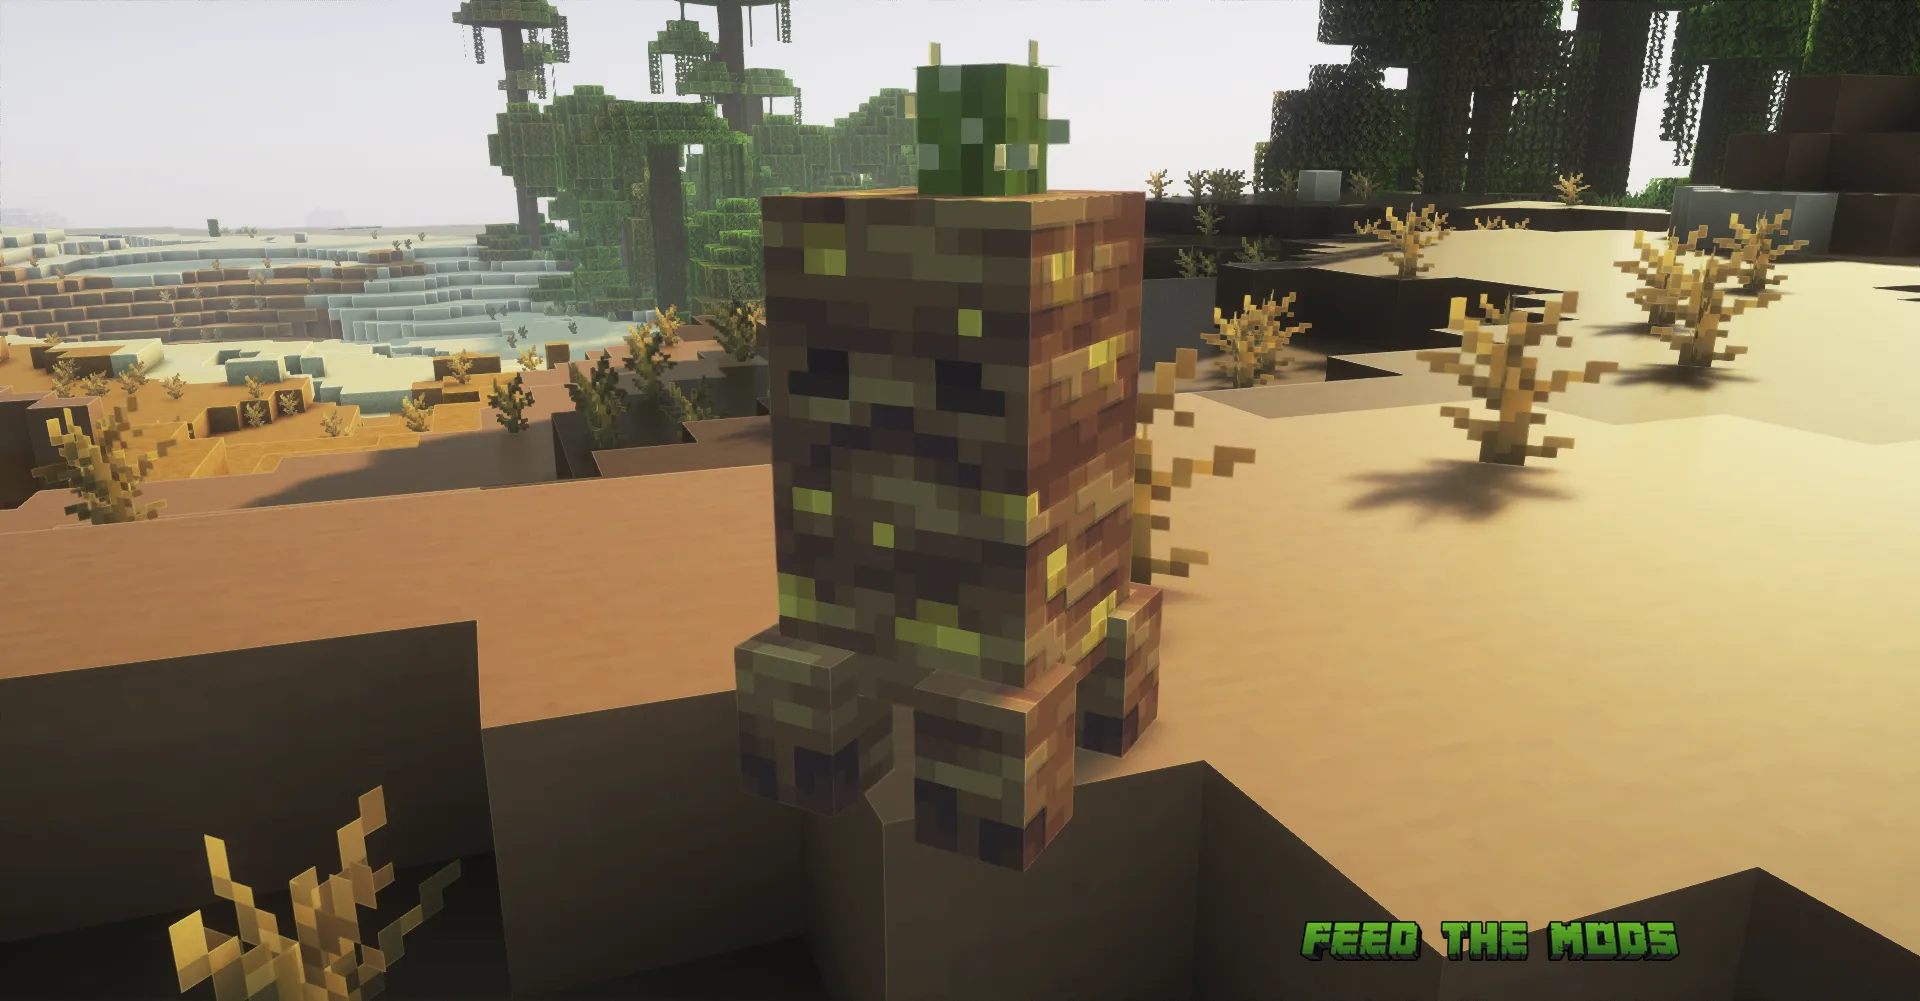 Been obsessed with the Creeper Overhaul mod recent - Tumbex